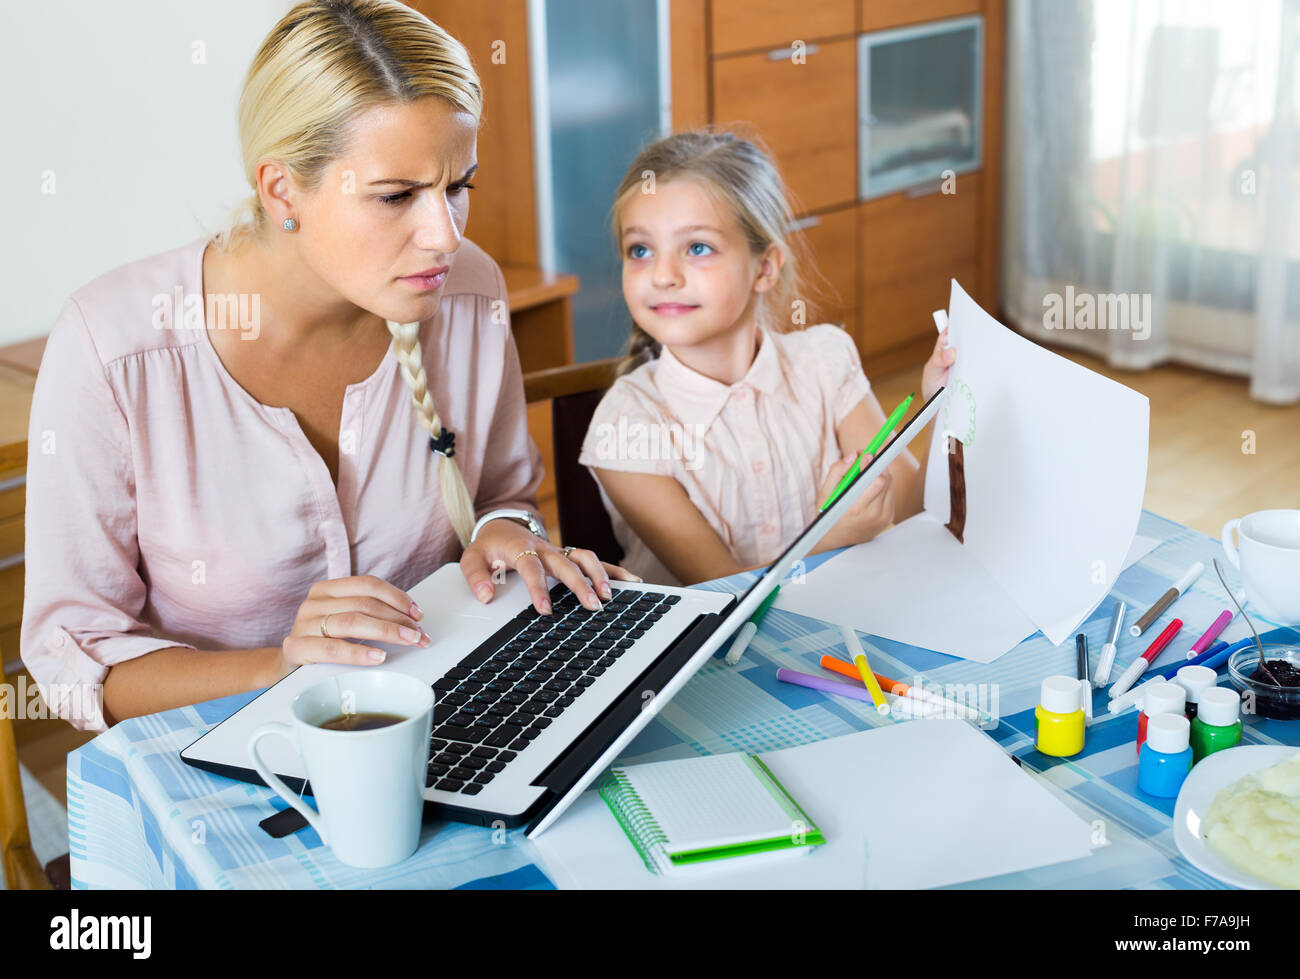 Tired young woman irritated as daughter diverts her from work at home Stock Photo